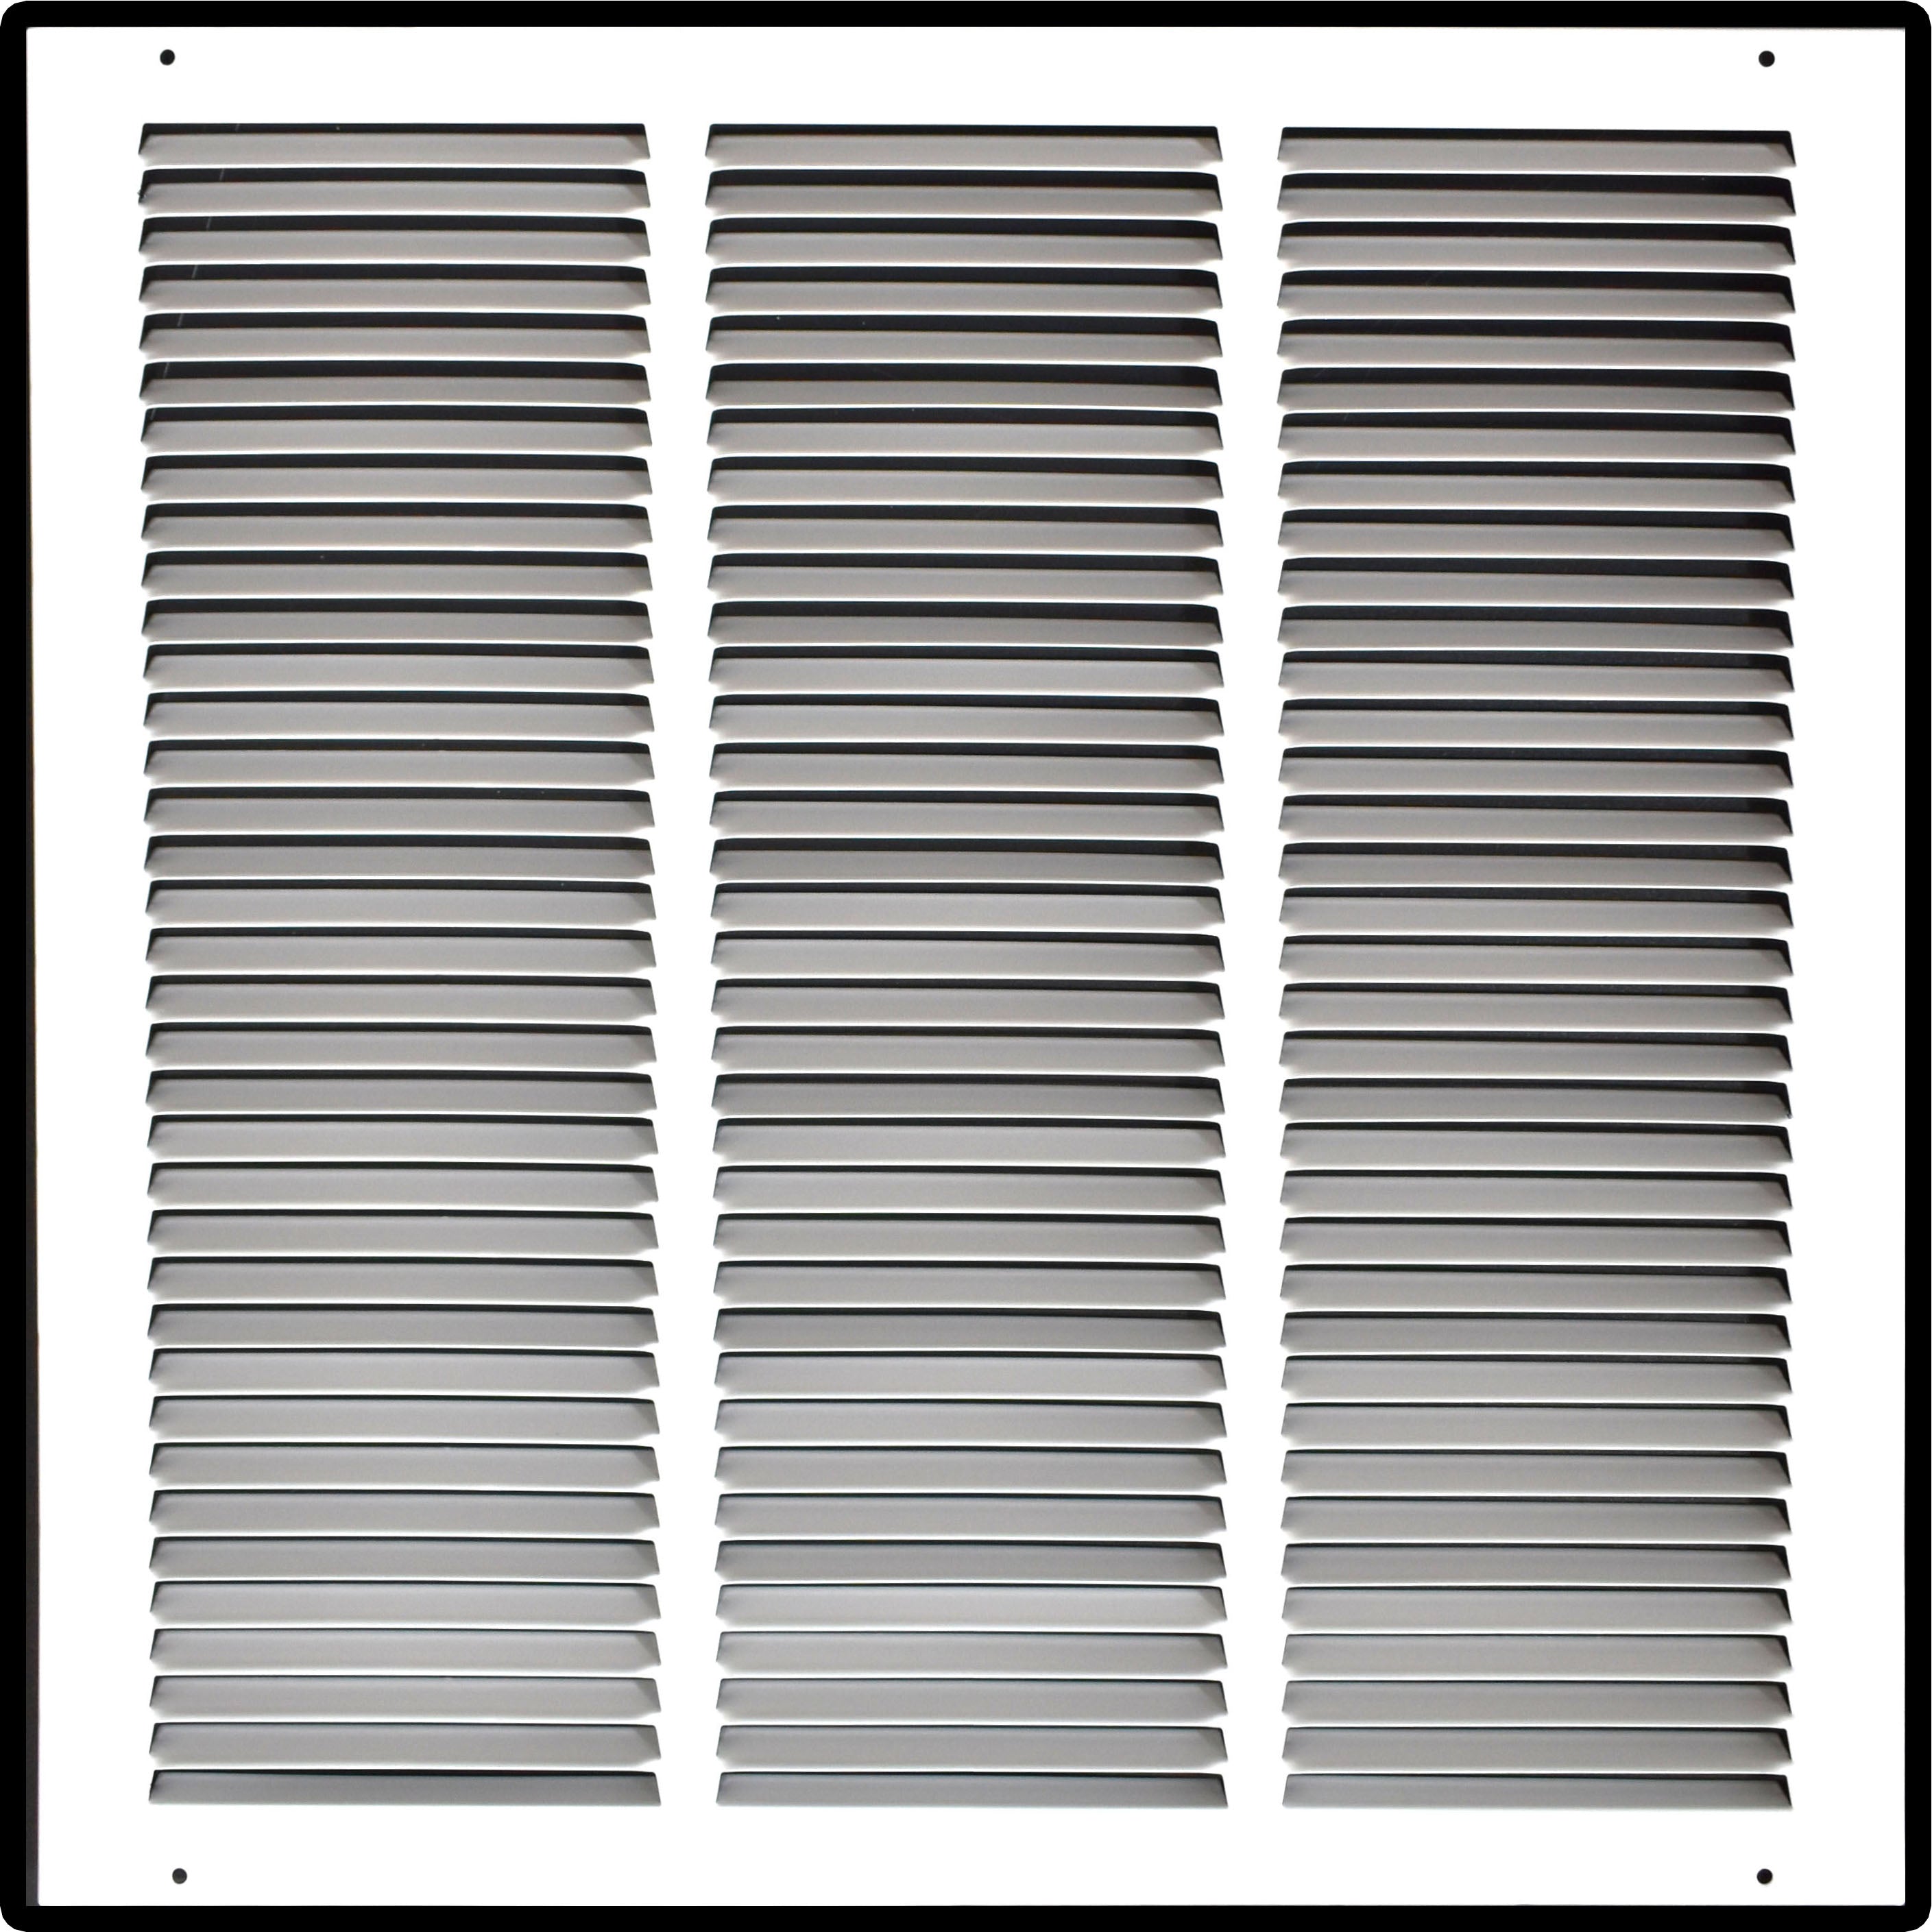 airgrilles 18" x 18" duct opening   hd steel return air grille for sidewall and ceiling  agc  7agc-flt-wh-18x18 756014649581 - 1